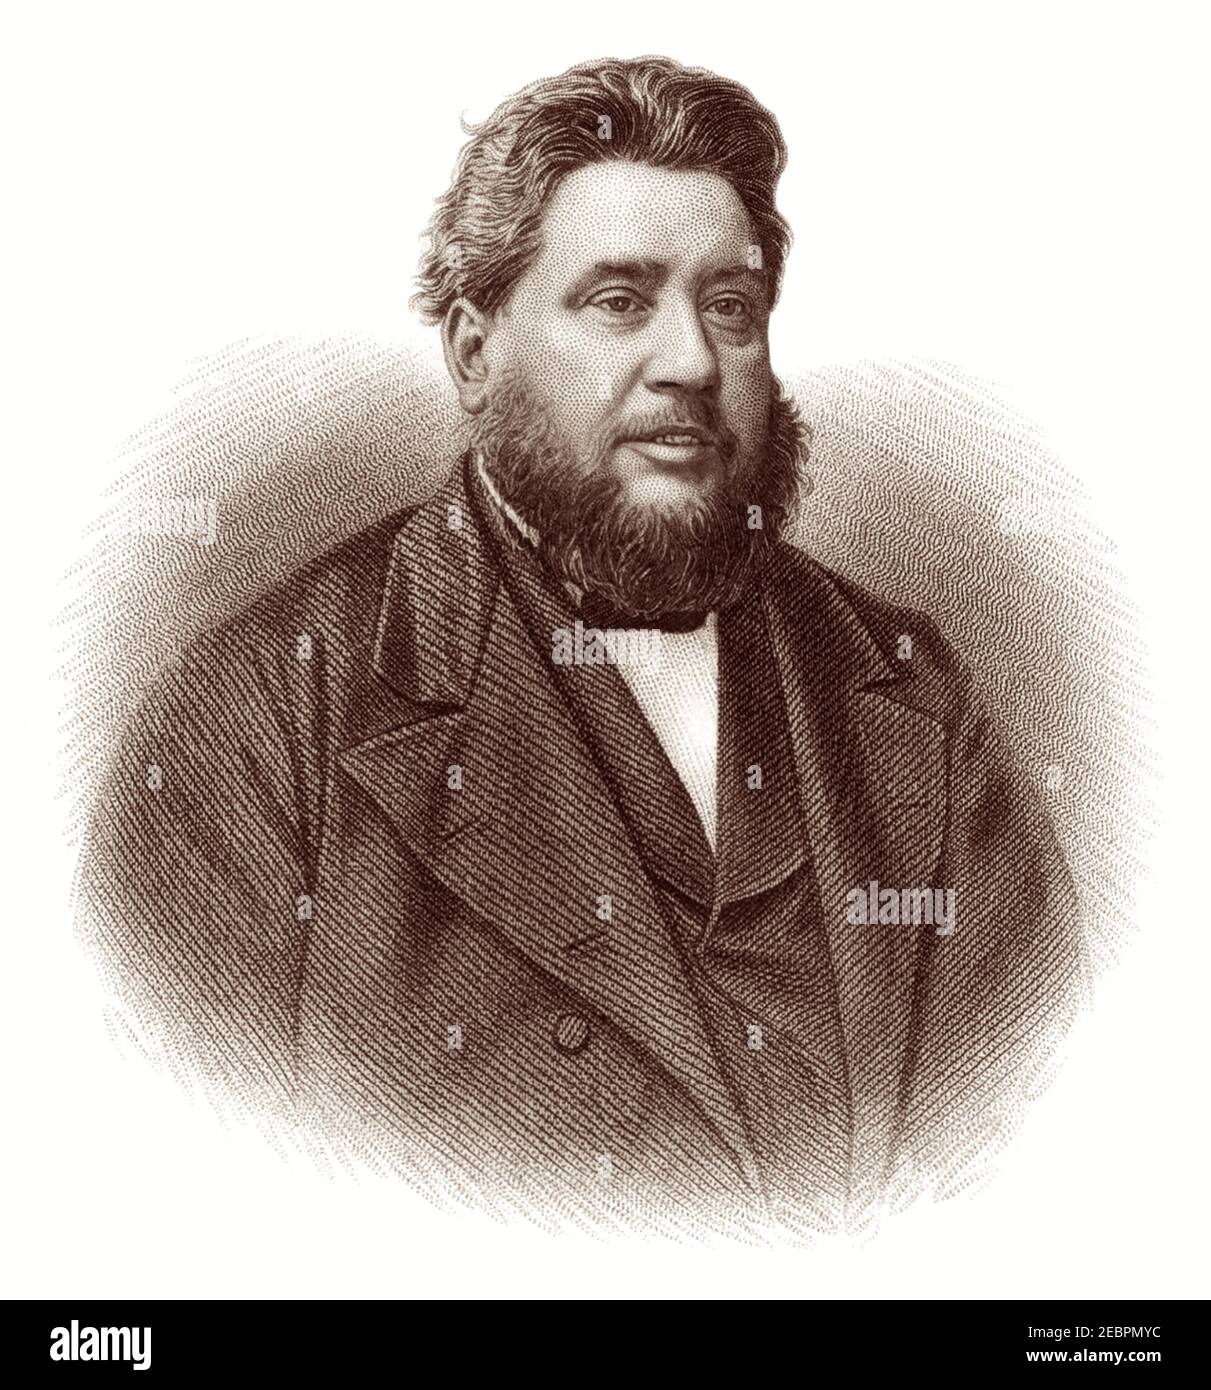 Charles Haddon Spurgeon (1834–1892), renowned Particular Baptist minister in London, England, known as the 'Prince of Preachers.' Stock Photo